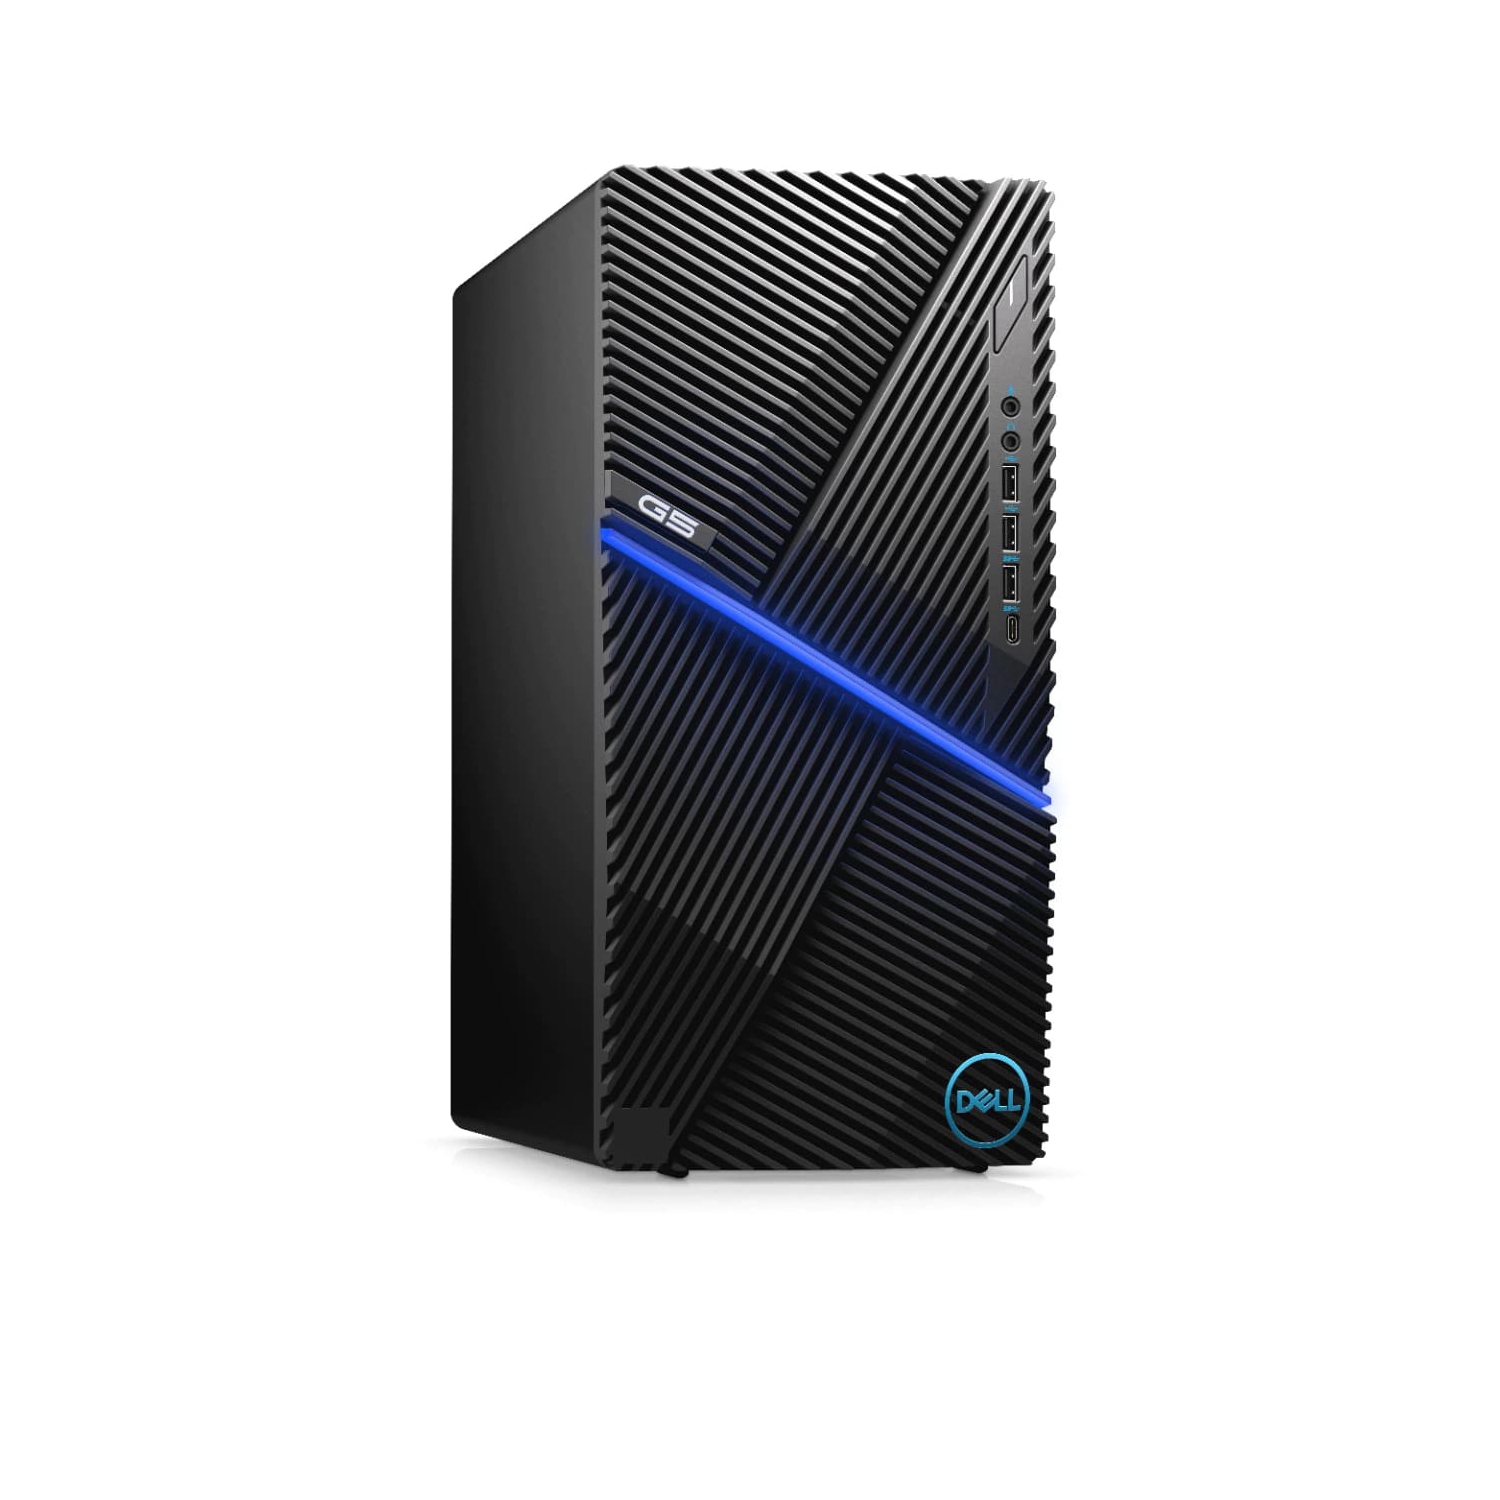 Refurbished (Excellent) - Dell G5 5000 Gaming Desktop (2020) | Core i7 - 1TB SSD - 16GB RAM - RTX 3060 | 8 Cores @ 5.1 GHz - 10th Gen CPU Certified Refurbished